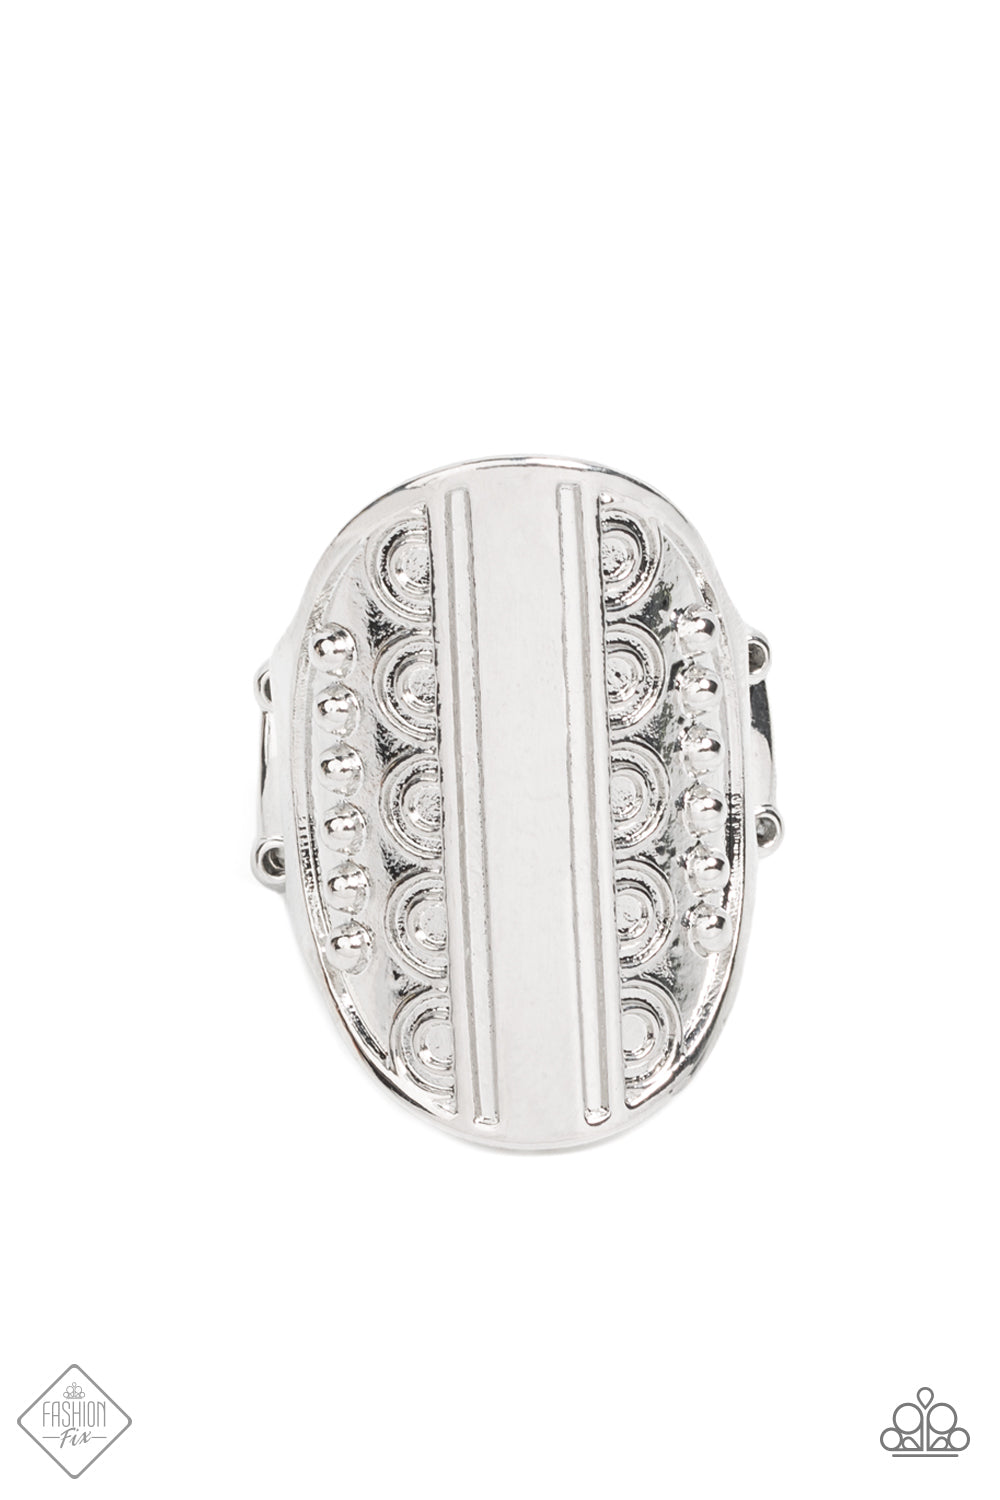 Paparazzi - Teeming With Texture - Silver Ring